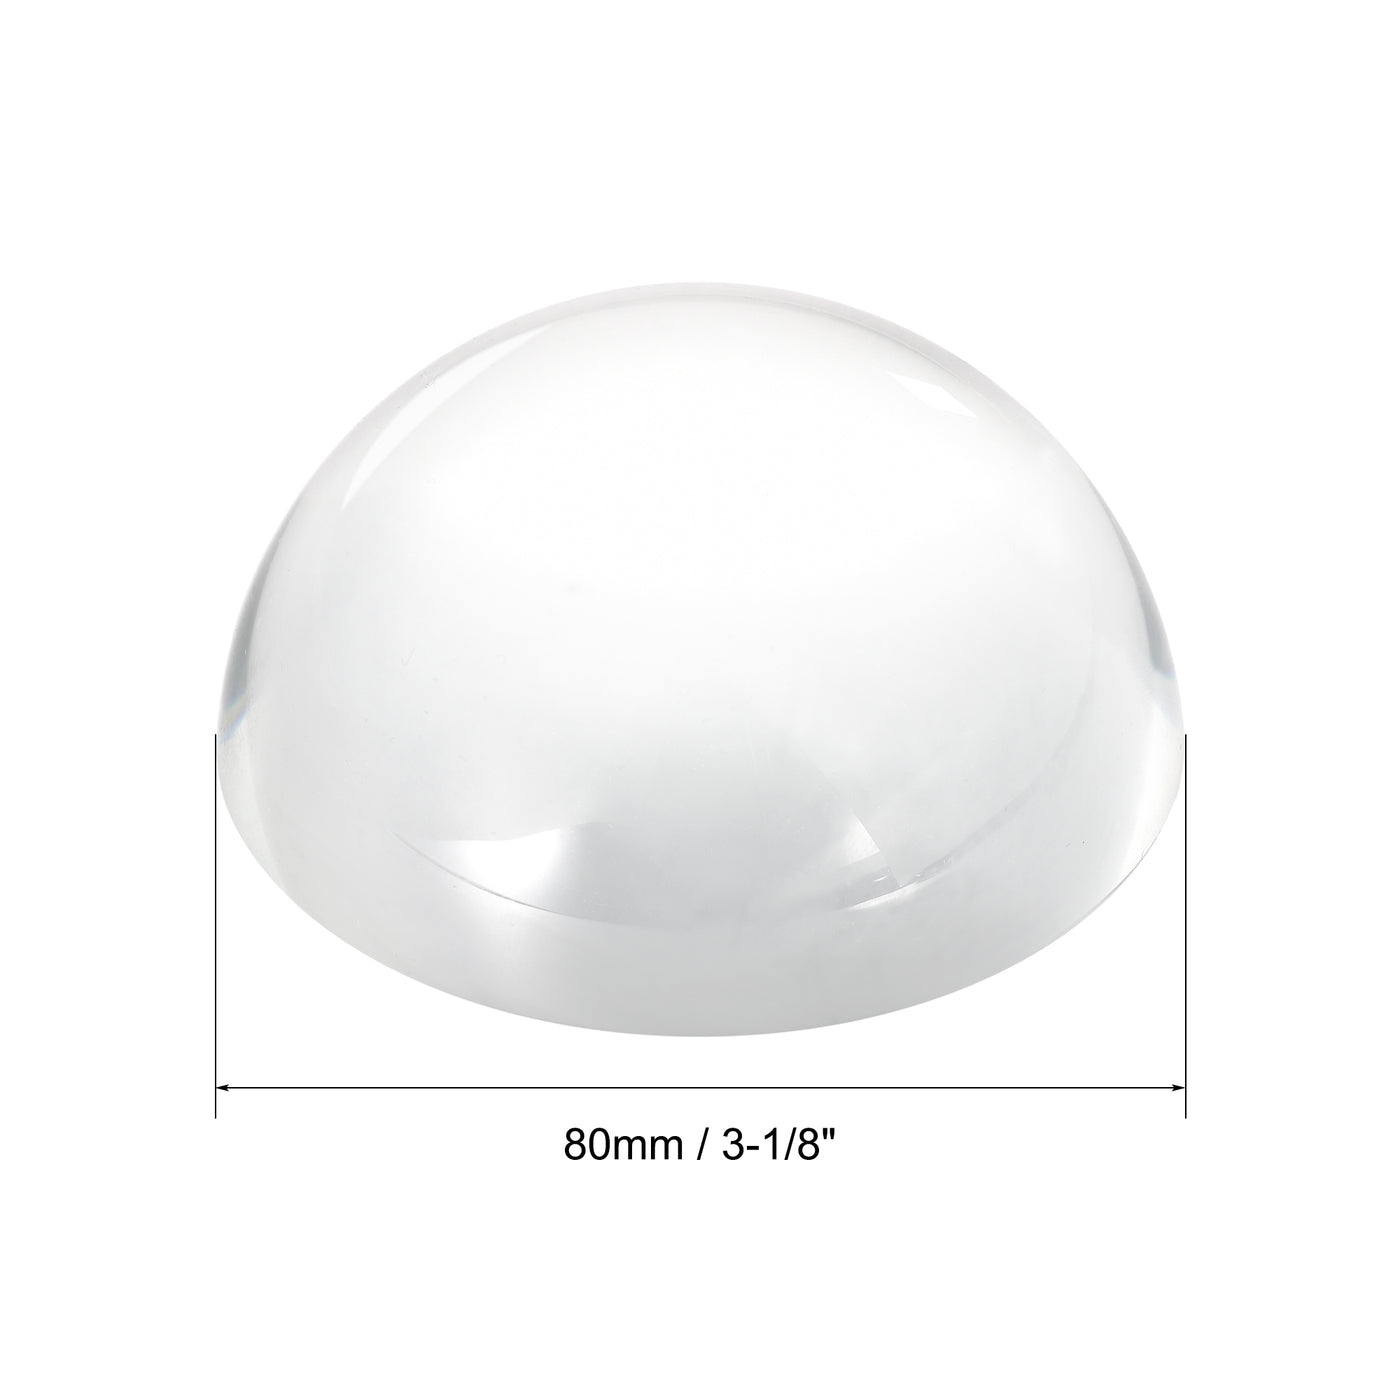 Uxcell Uxcell 3-1/2" Dome Magnifier 6X Acrylic Half Ball Reading Magnifying Glass with Polishing Pouch